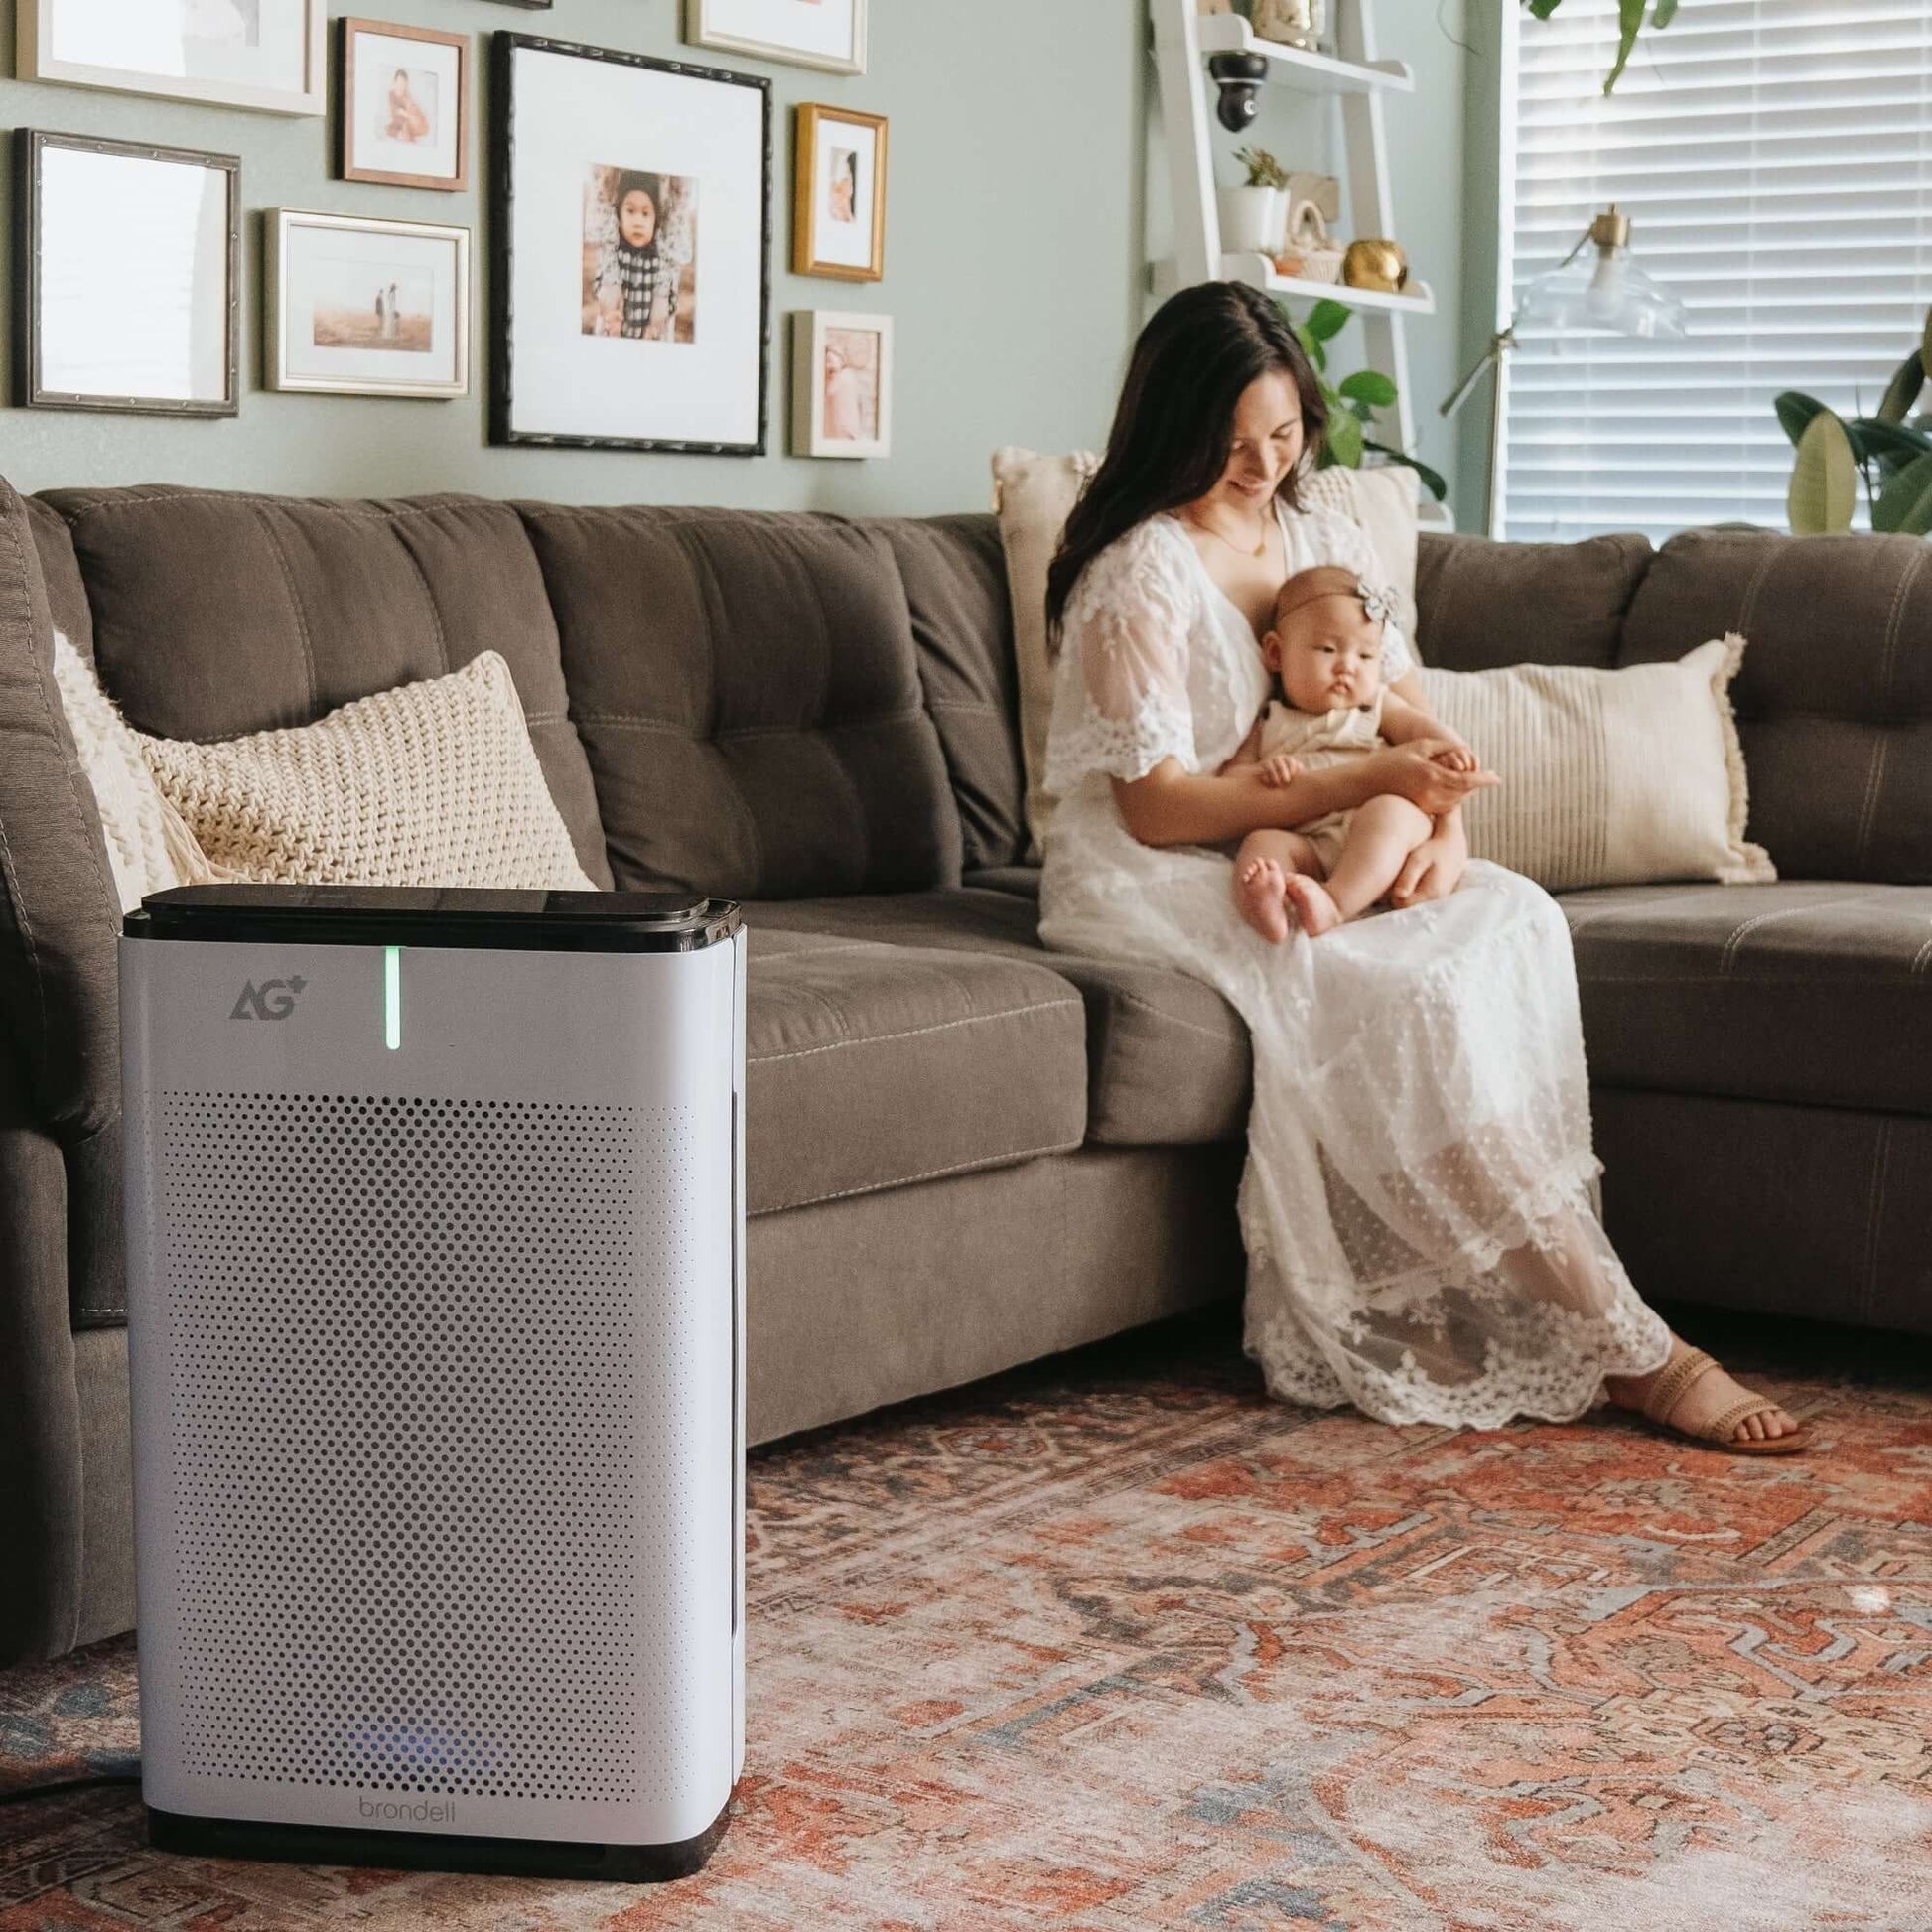 Brondell Pro Sanitizing Air Purifier with AG+ Technology for Purification of SARS-CoV-2, Virus, Bacteria and Allergens - front view in a room by a couch